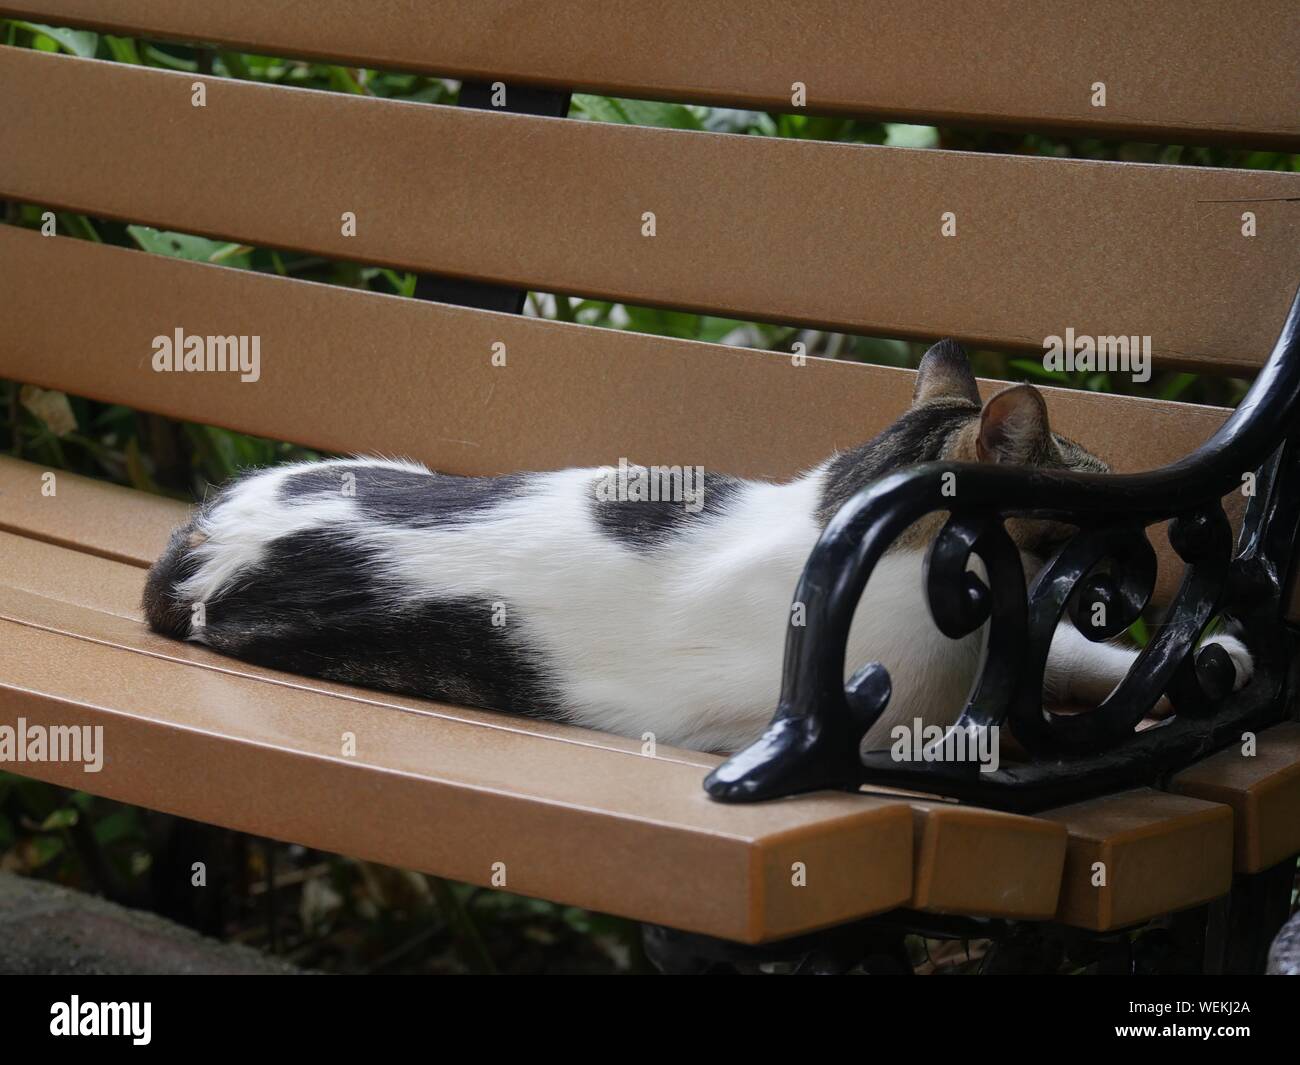 A black and white cat on a wooden bench at the Hemingway house in Key West, Florida. Stock Photo